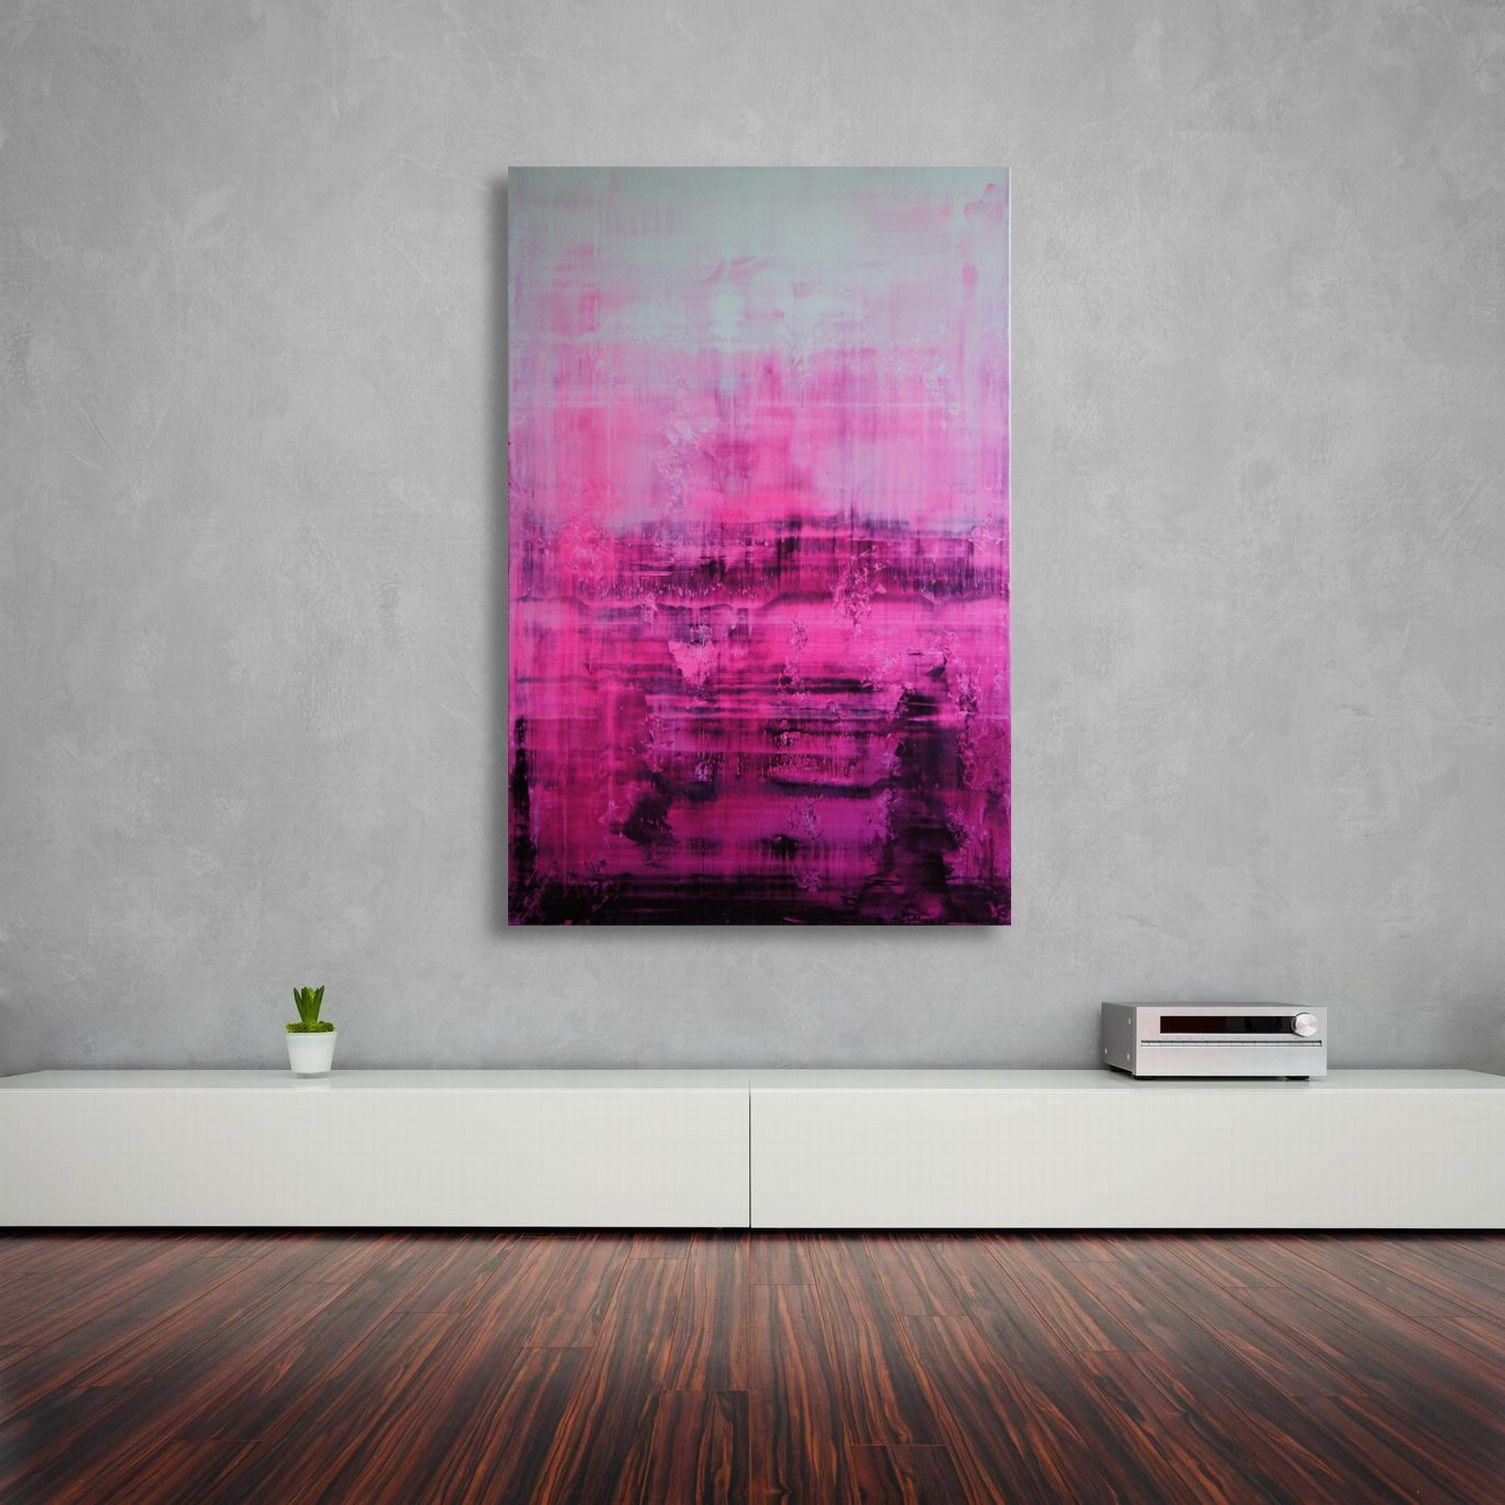 Be welcome to her dreamscapes in pink. Enjoy! This is the first of the series.    Unique painting using high-quality acrylic colors on gesso-primed professional gallery canvas stretched over solid wooden 4.5 x 3.0 cm stretcher bars (painting depth: